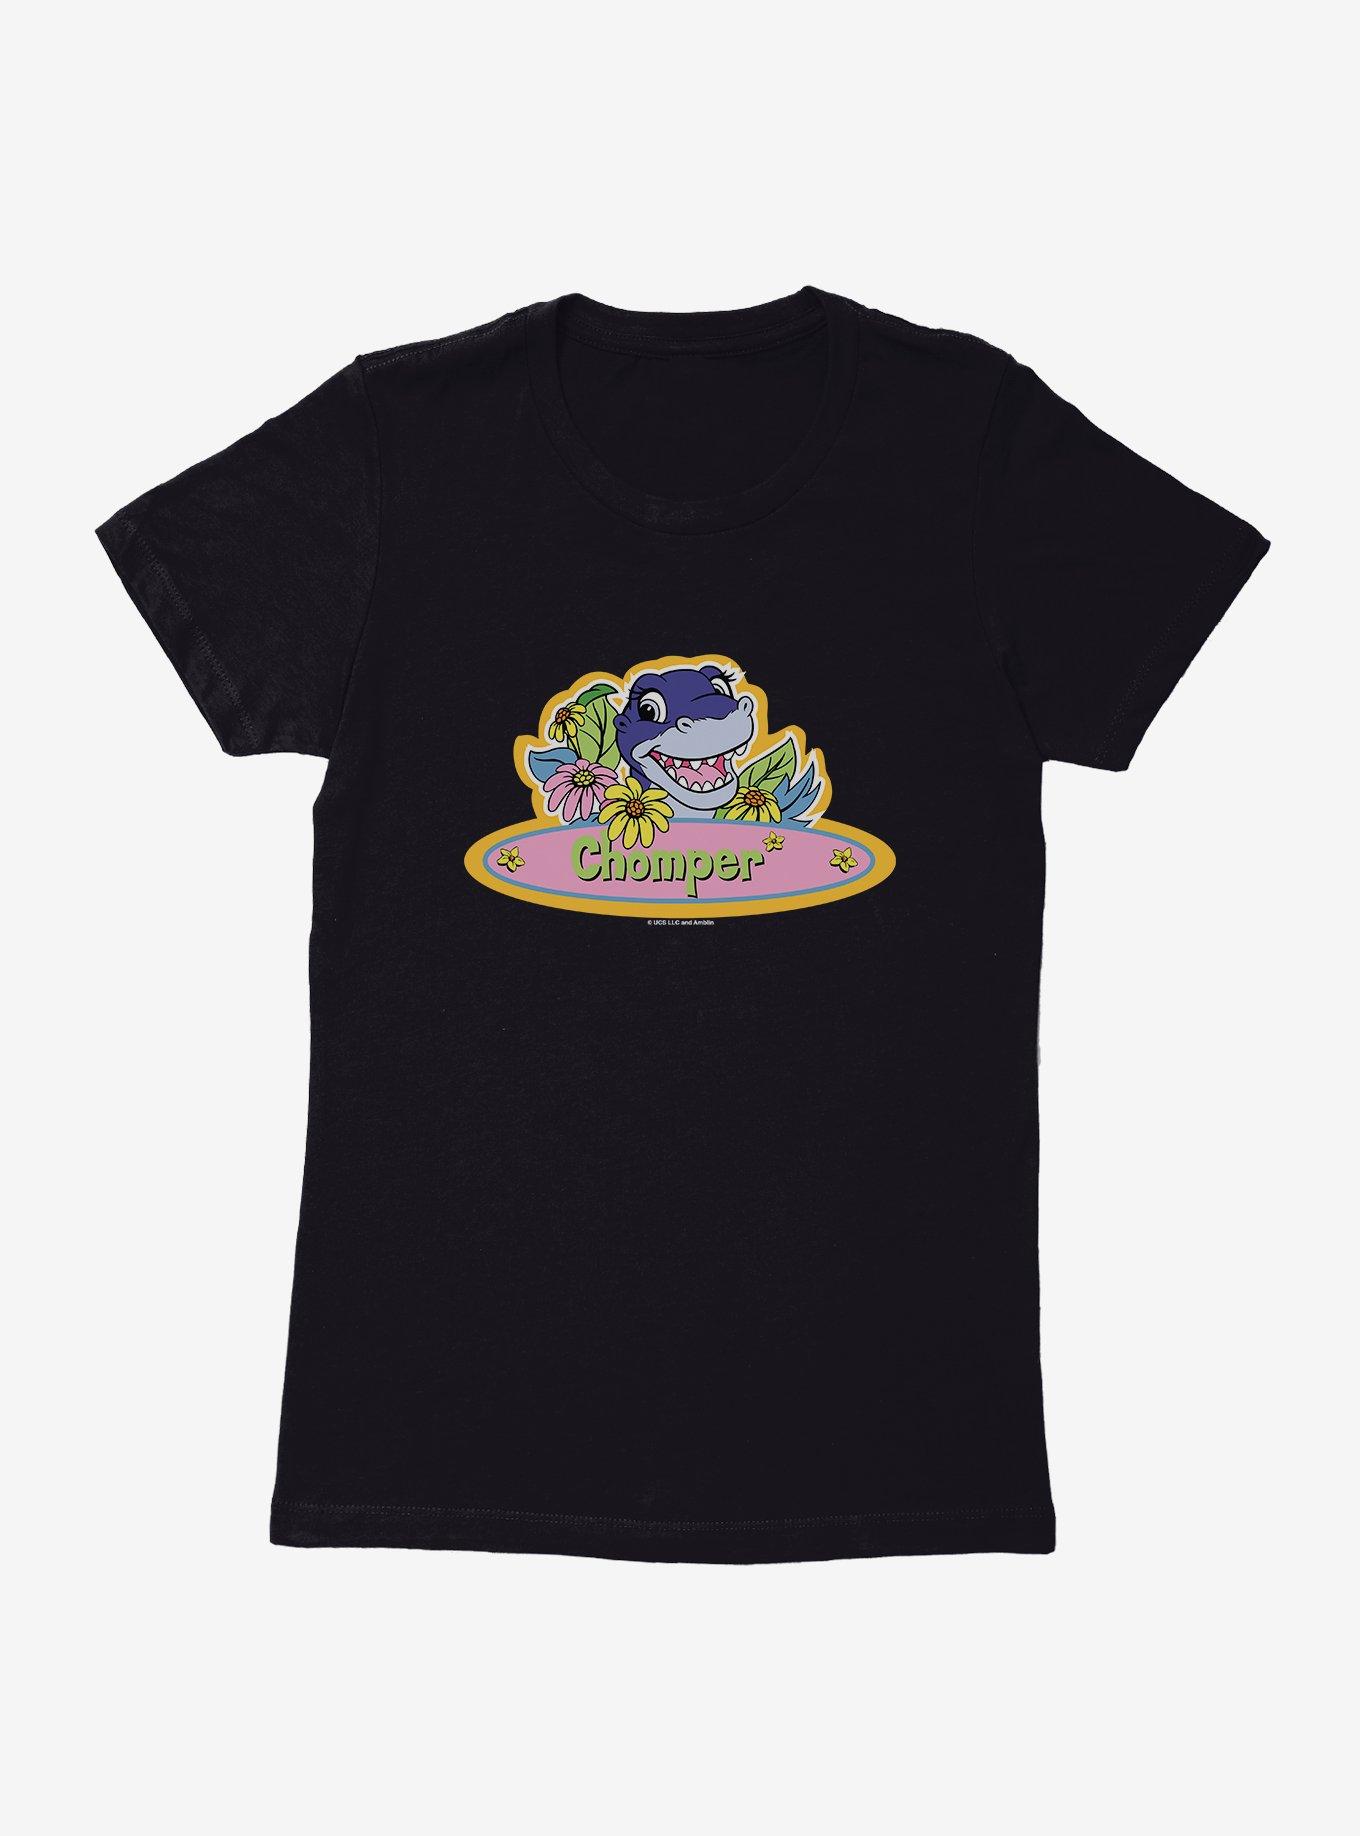 The Land Before Time Chomper Name Sign Womens T-Shirt, BLACK, hi-res